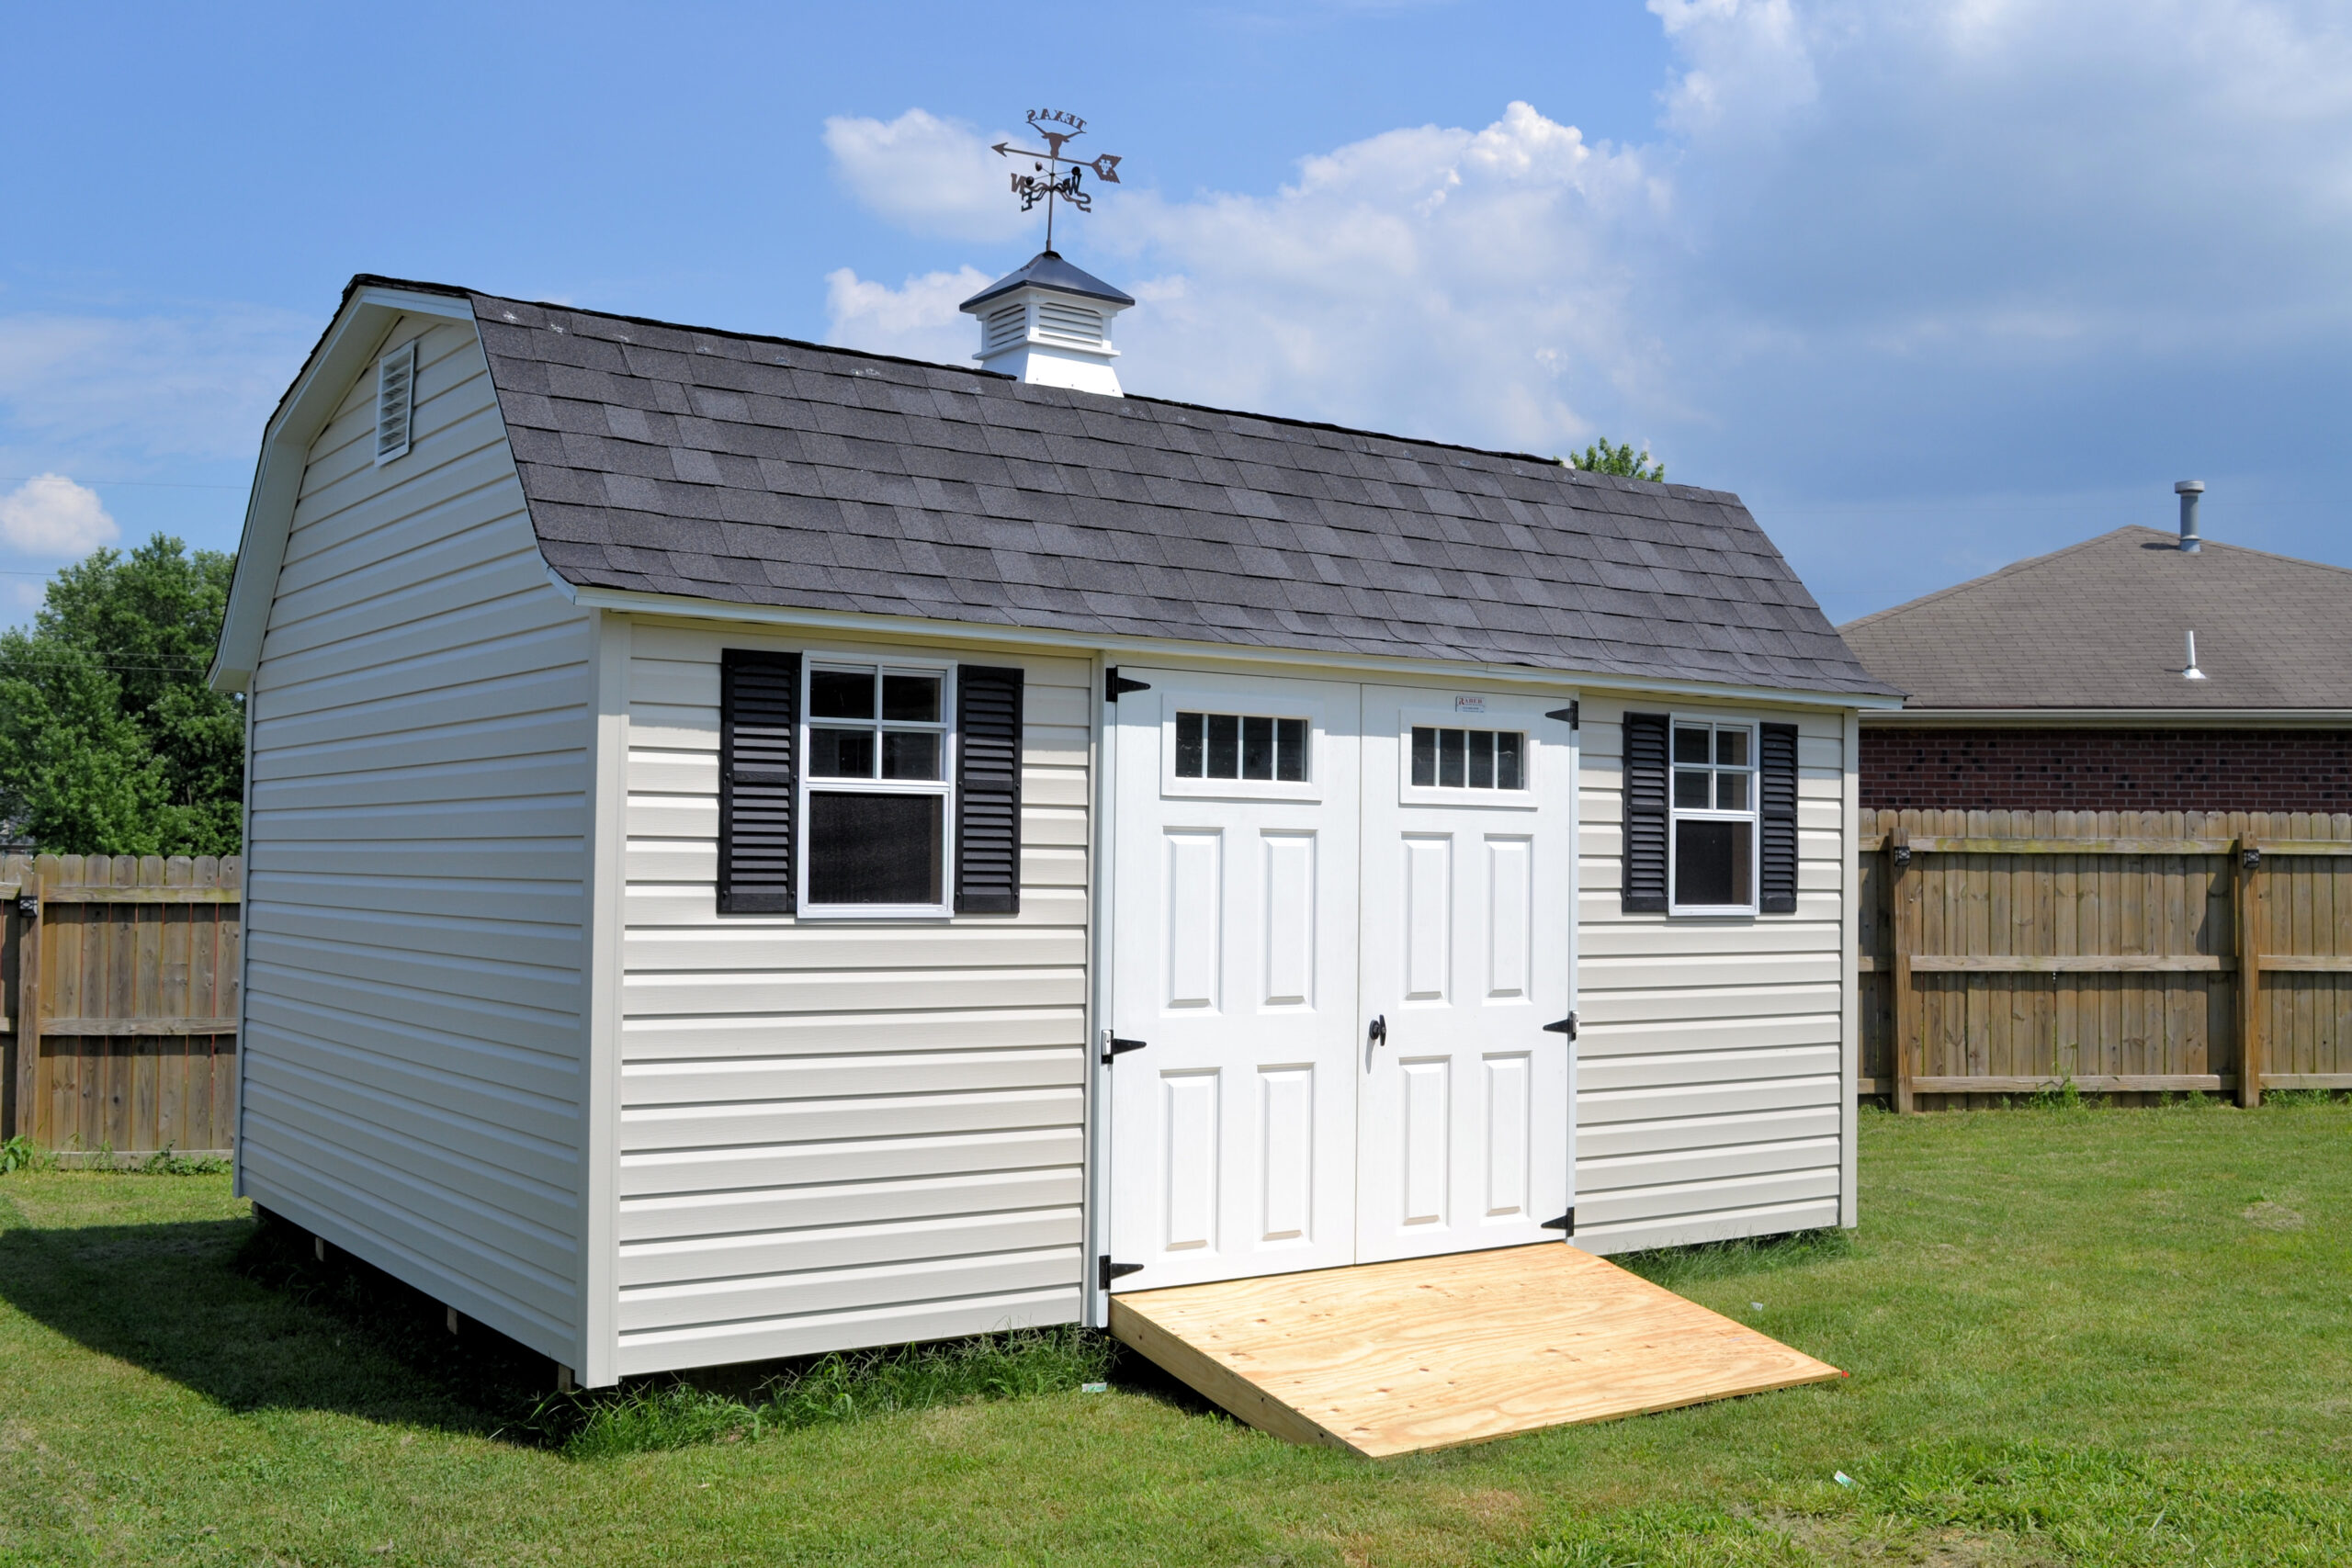 garden shed with transom windows and cupola